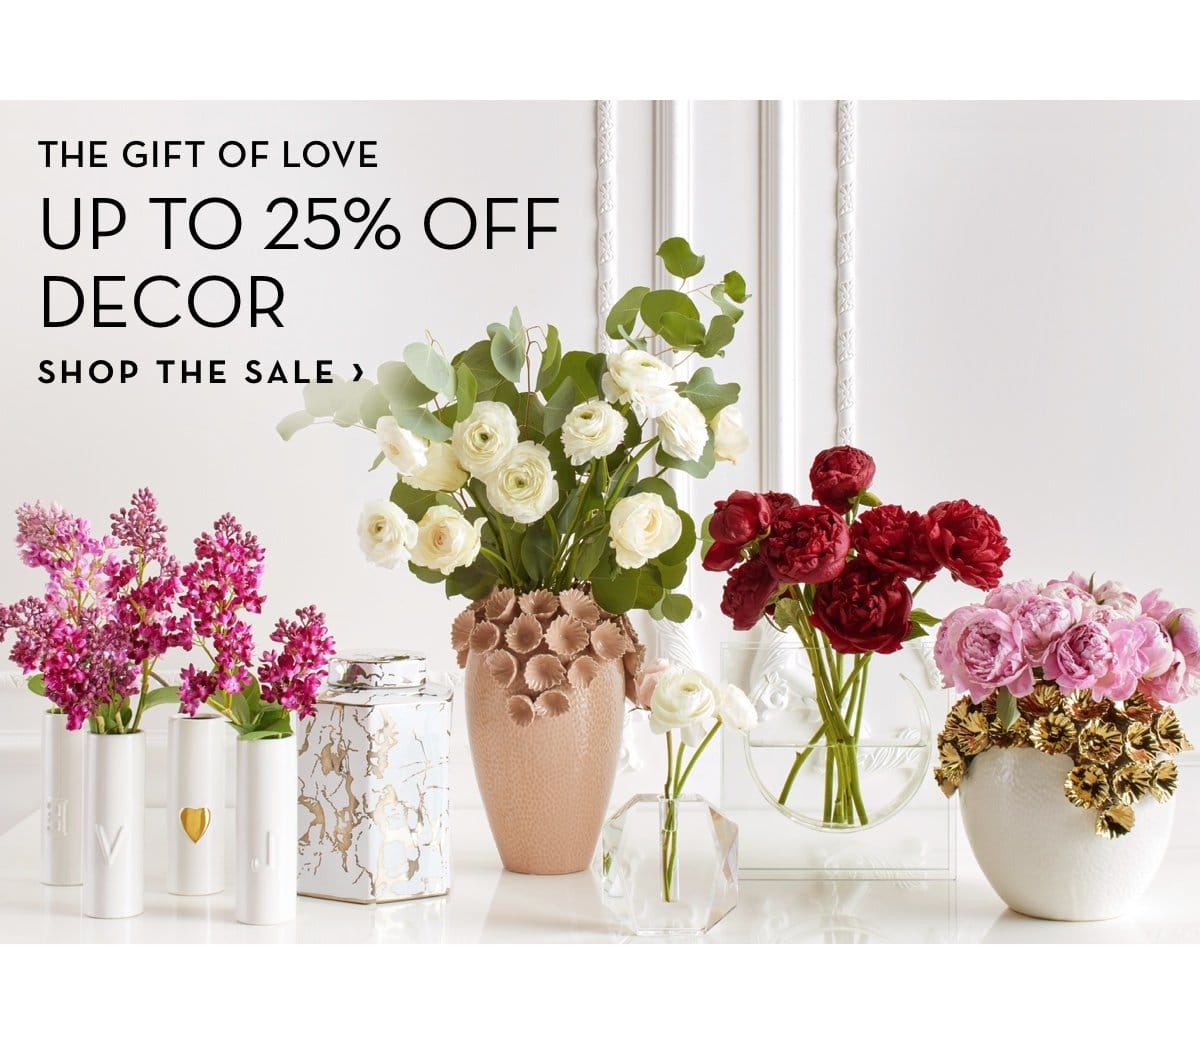 The Gift of Love Sale